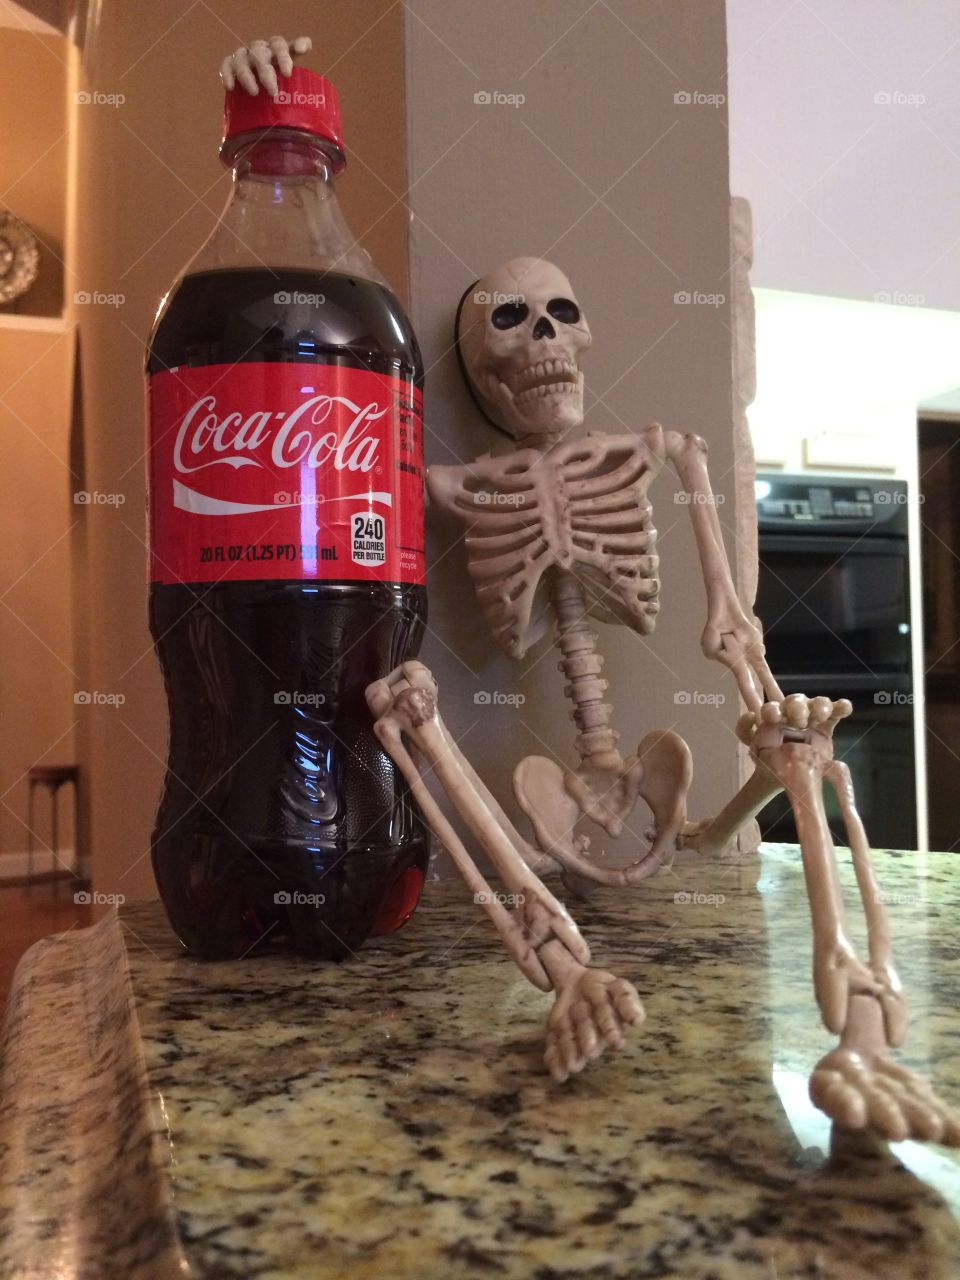 Skeleton and Coca-Cola on the counter